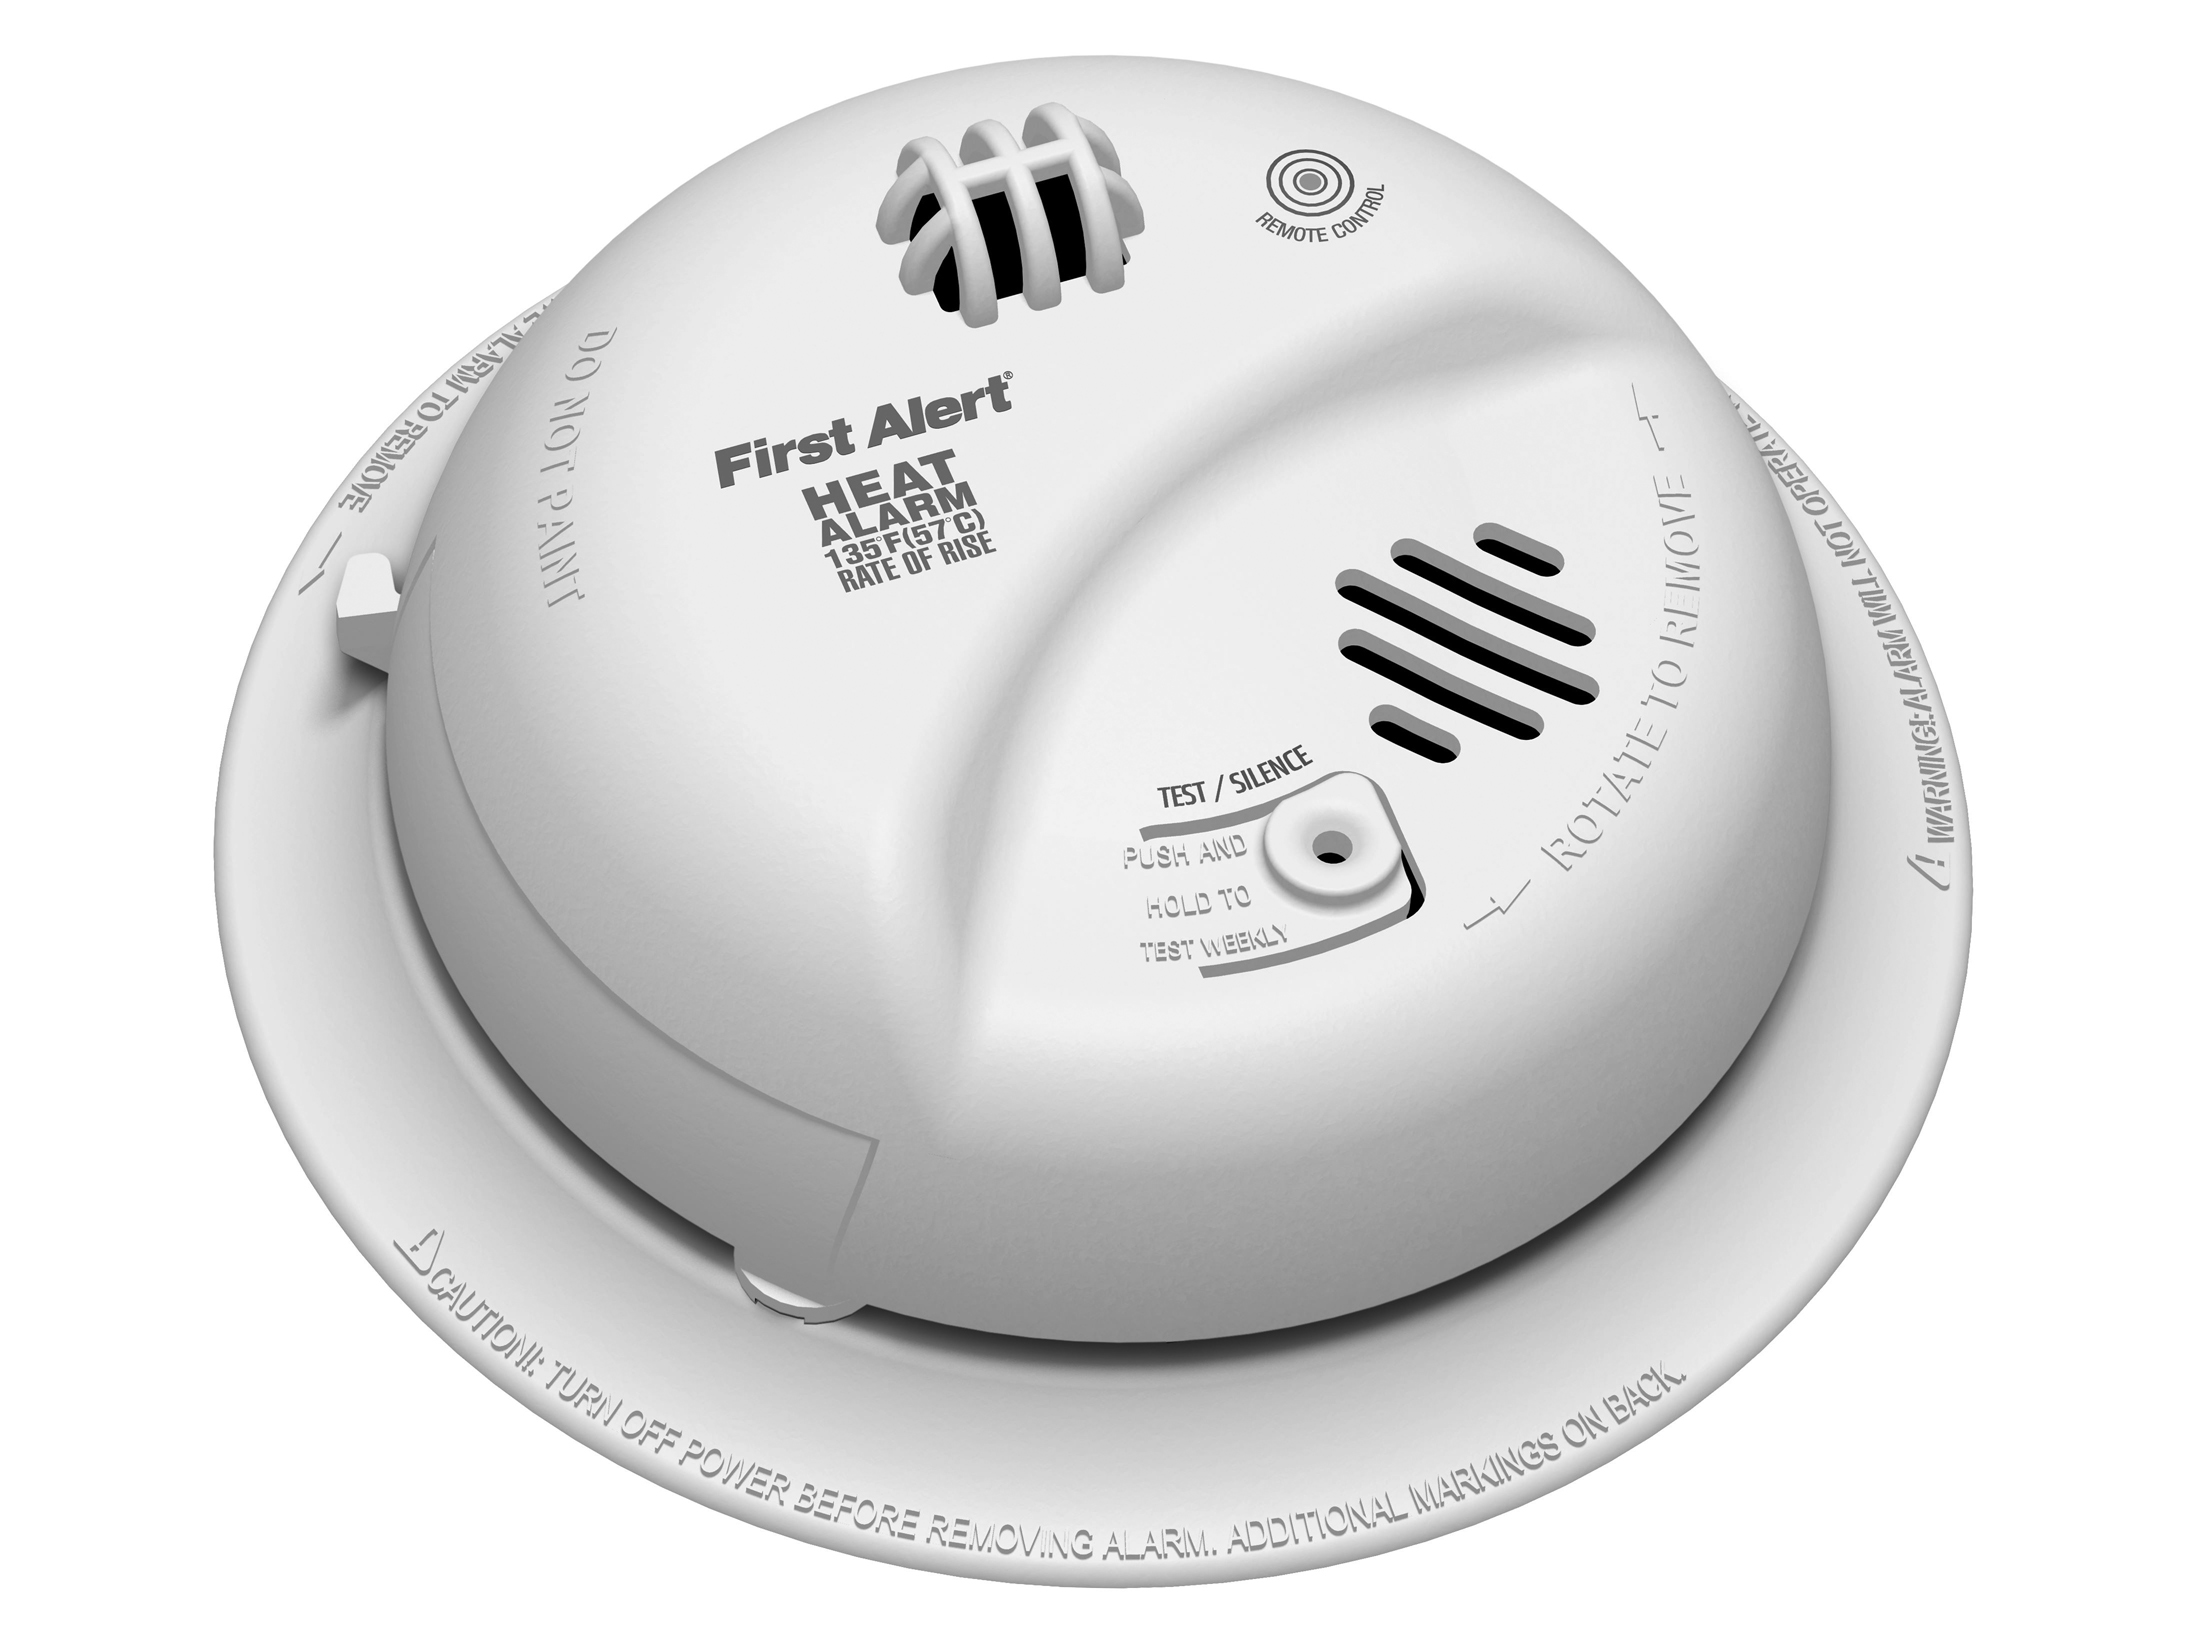 The most feature rich heat alarm for residential use in its class. Features advanced rate-of-rise technology found in more expensive commercial/industrial alarms at an economical cost. Exclusive IR remote control test/silence feature provides unparal...